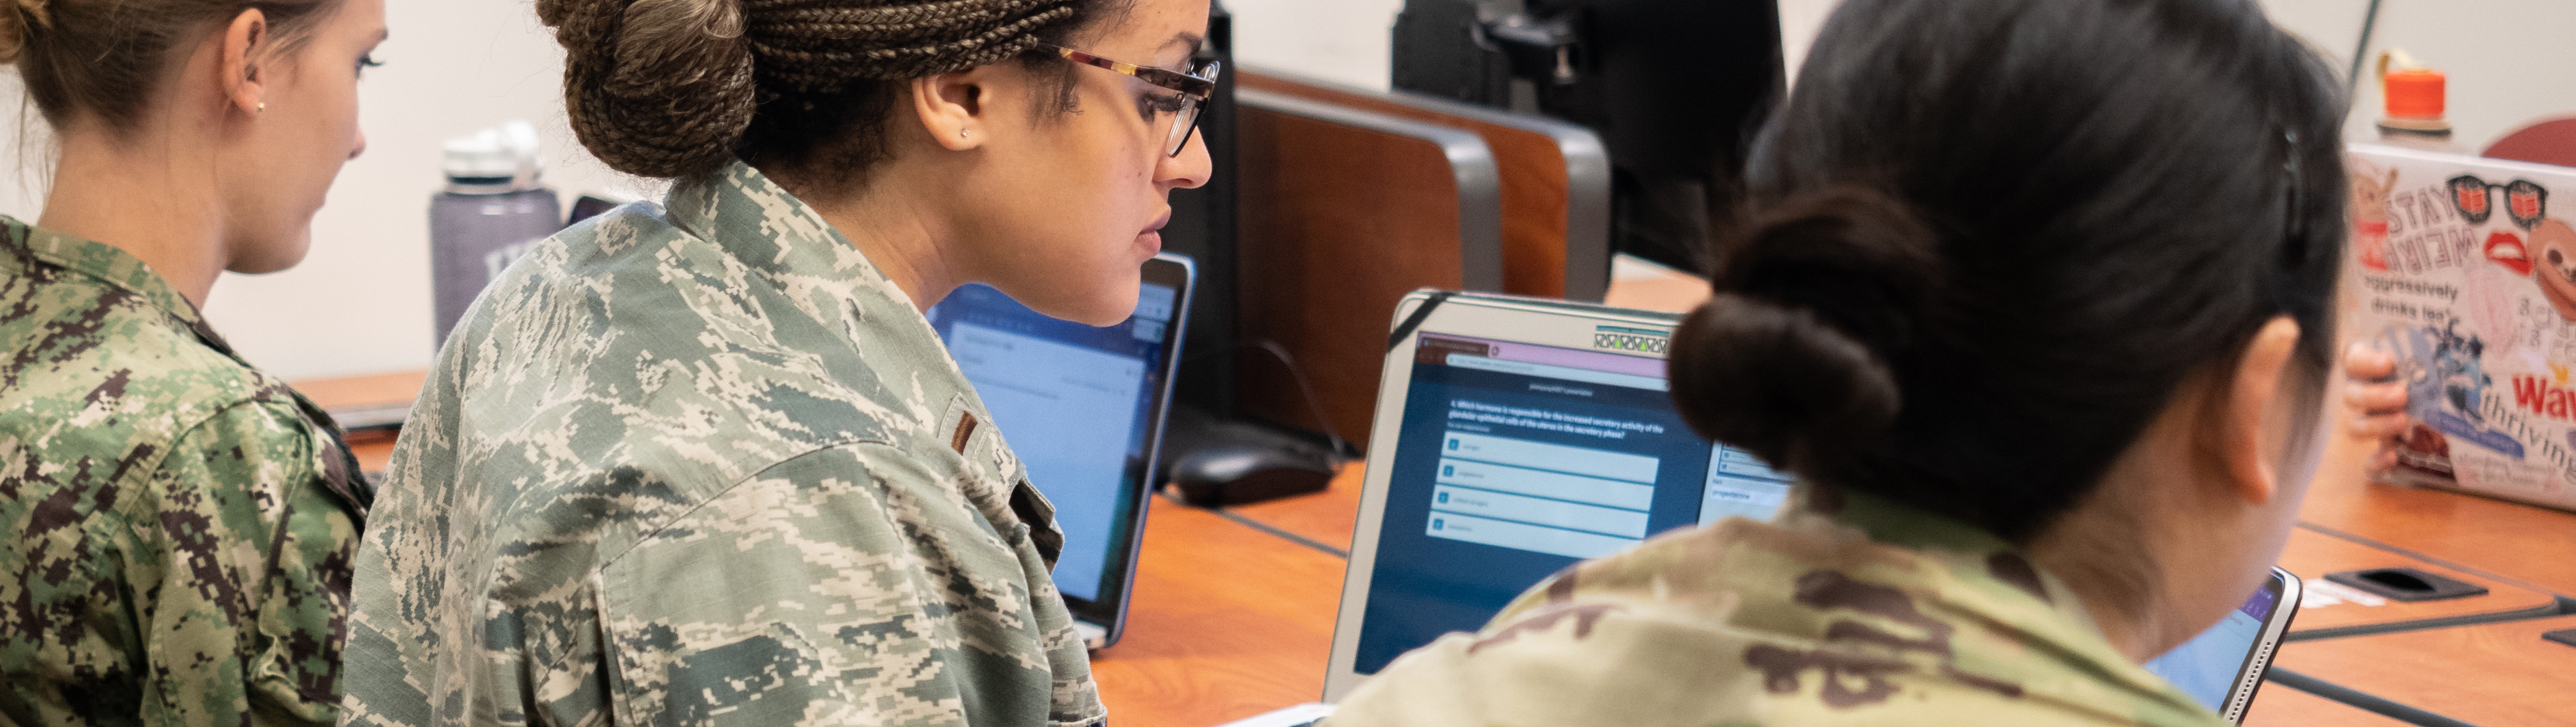 military students using laptops